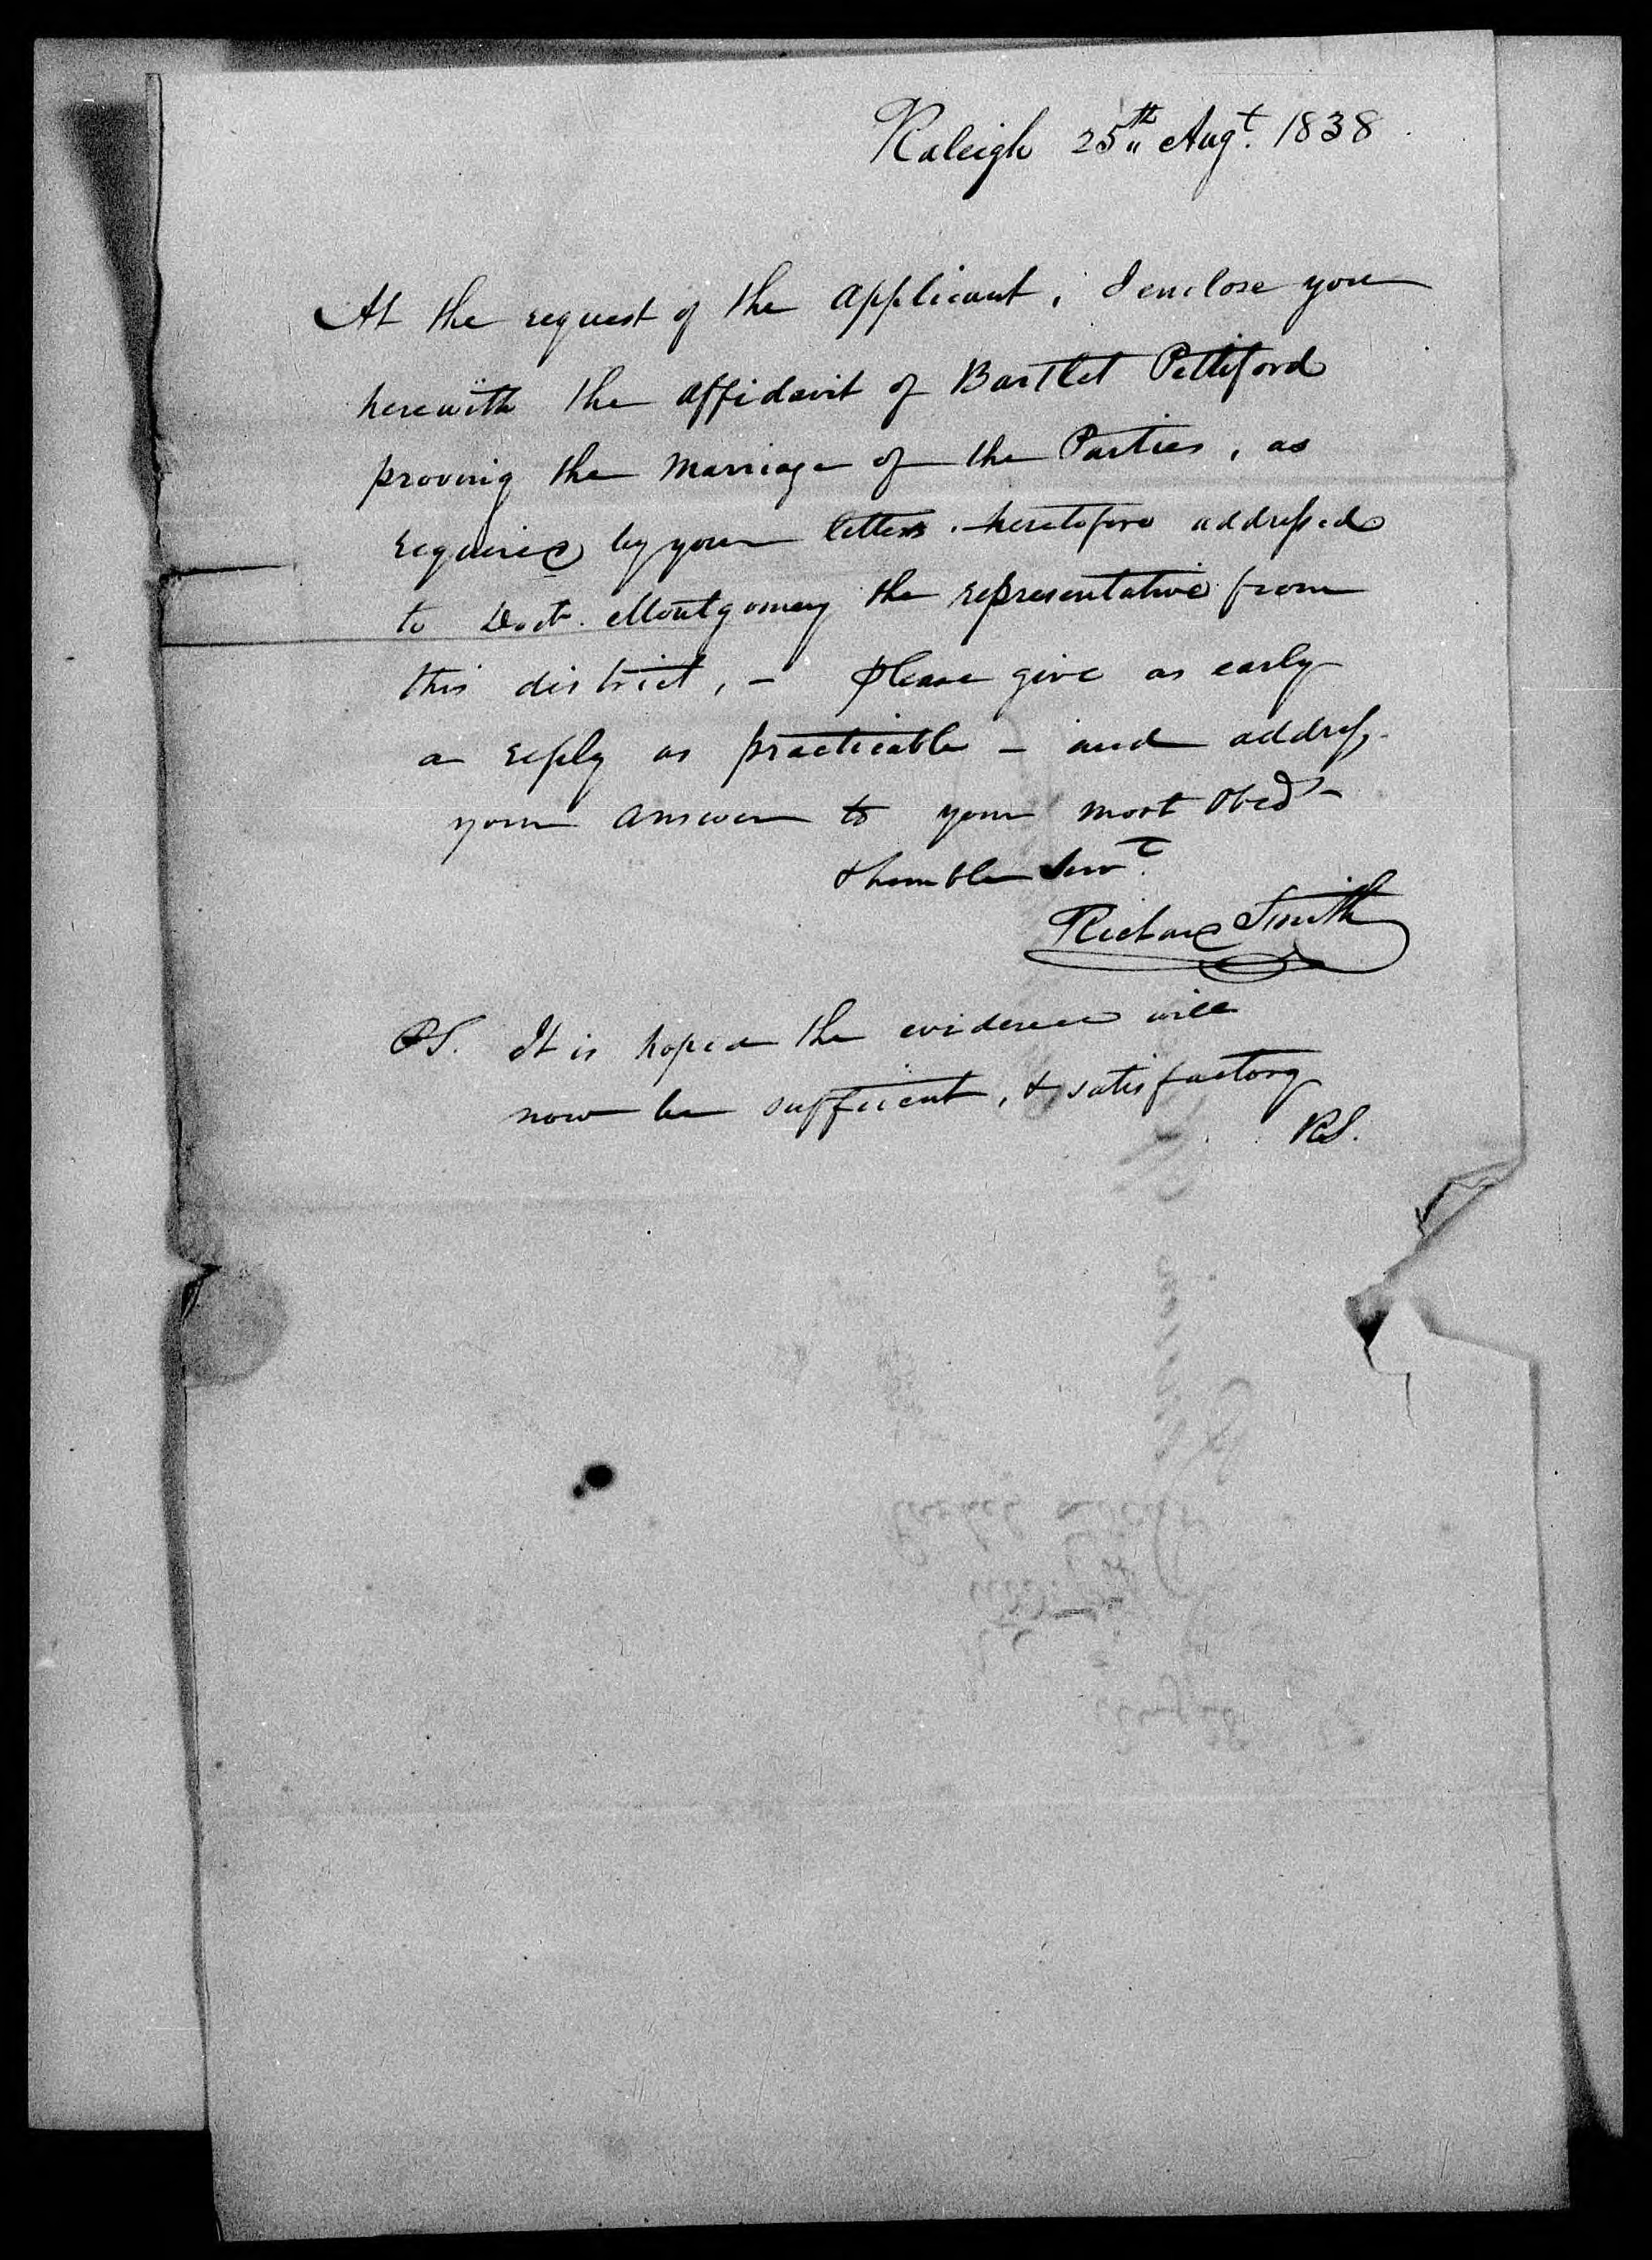 Letter from Richard Smith to the United States Pension Office, 25 August 1838, page 1